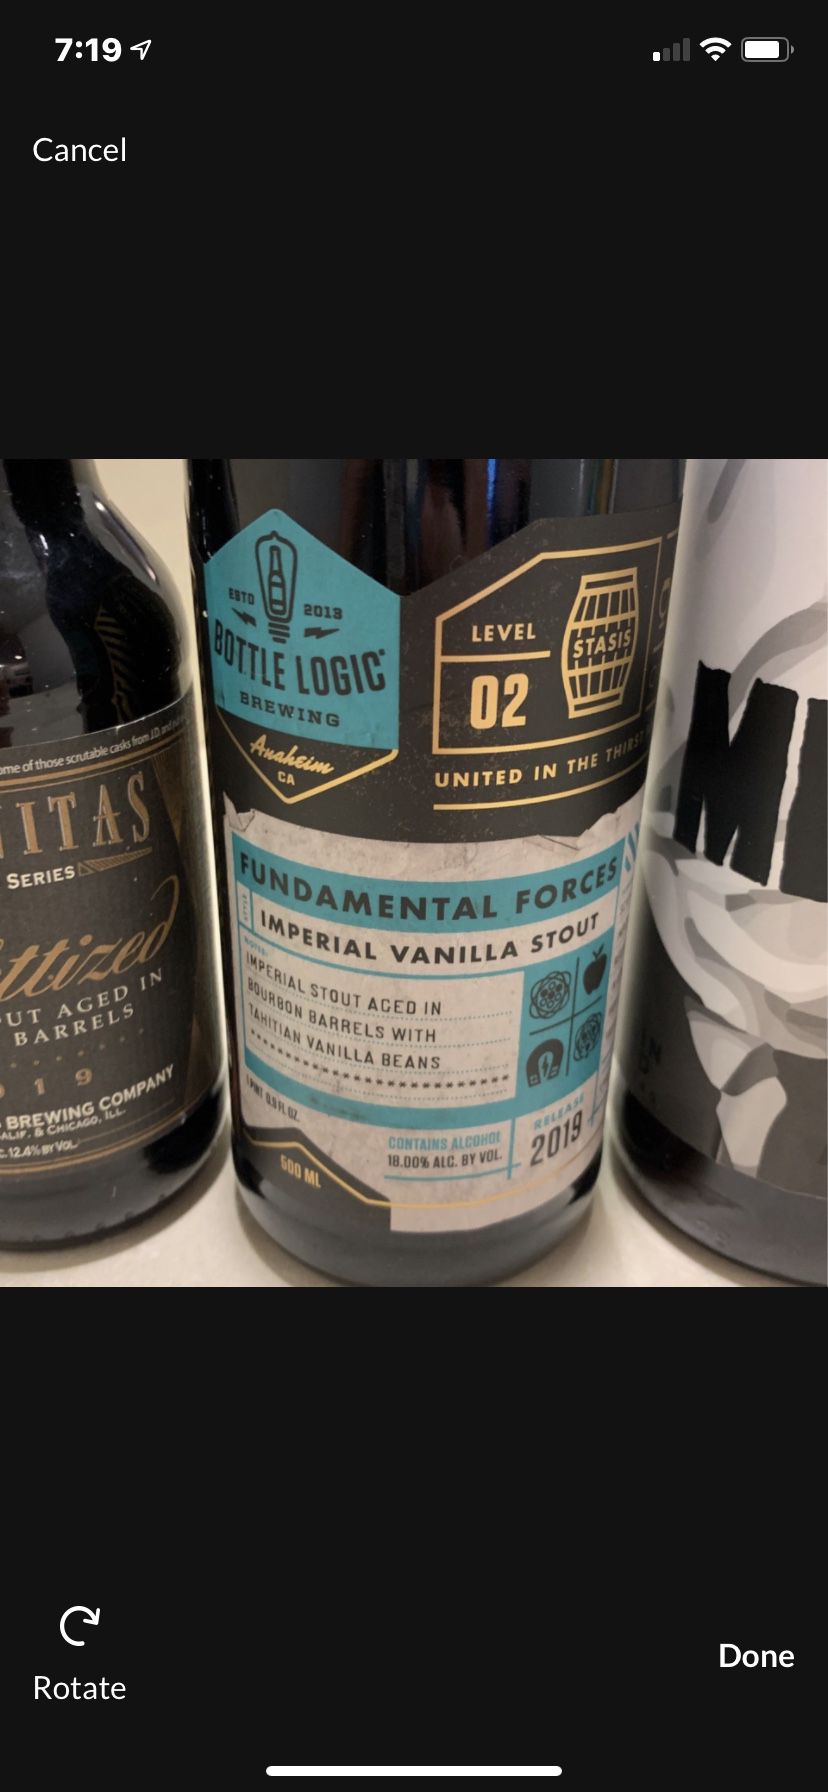 Bottle Logic Brewery 2019 Fundamental Forces Beer (message for contents) - Will Include 5 Other Delicious Bottles!!  Price: $30